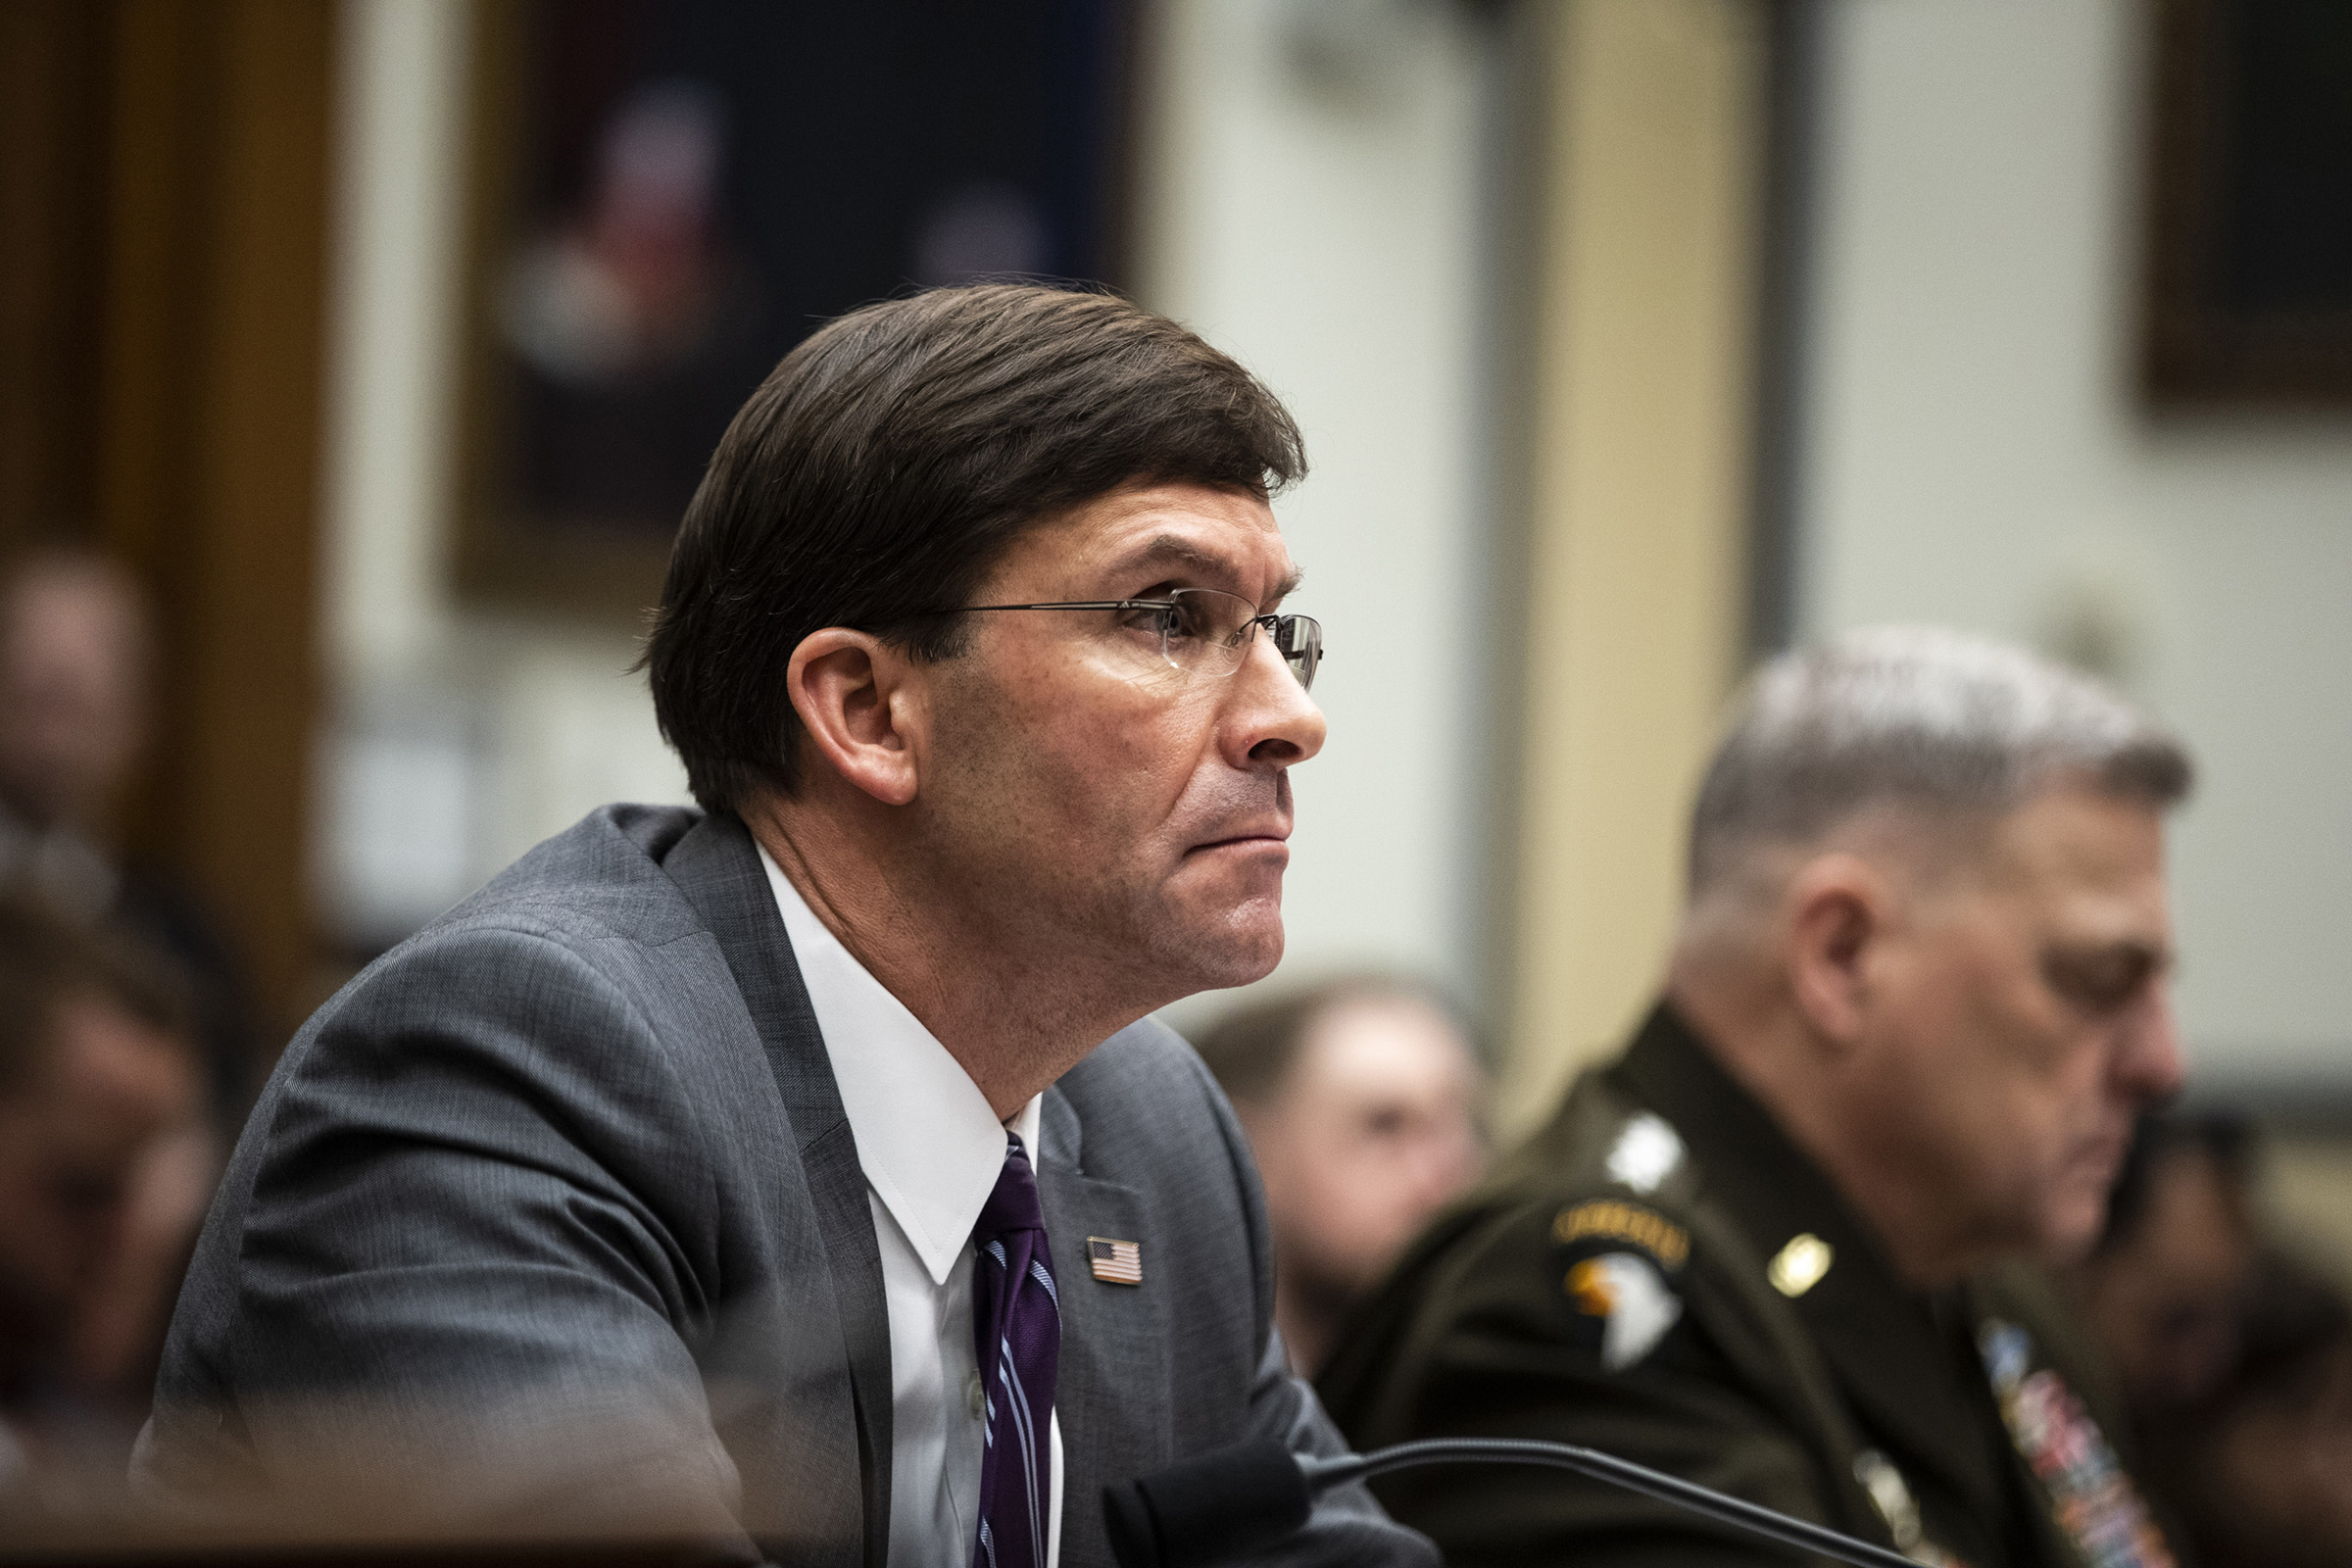 Defense Secretary Mark Esper appears before the House Armed Services Committee in Washington on Feb. 26, 2020. (Anna Moneymaker—The New York Times/Redux)